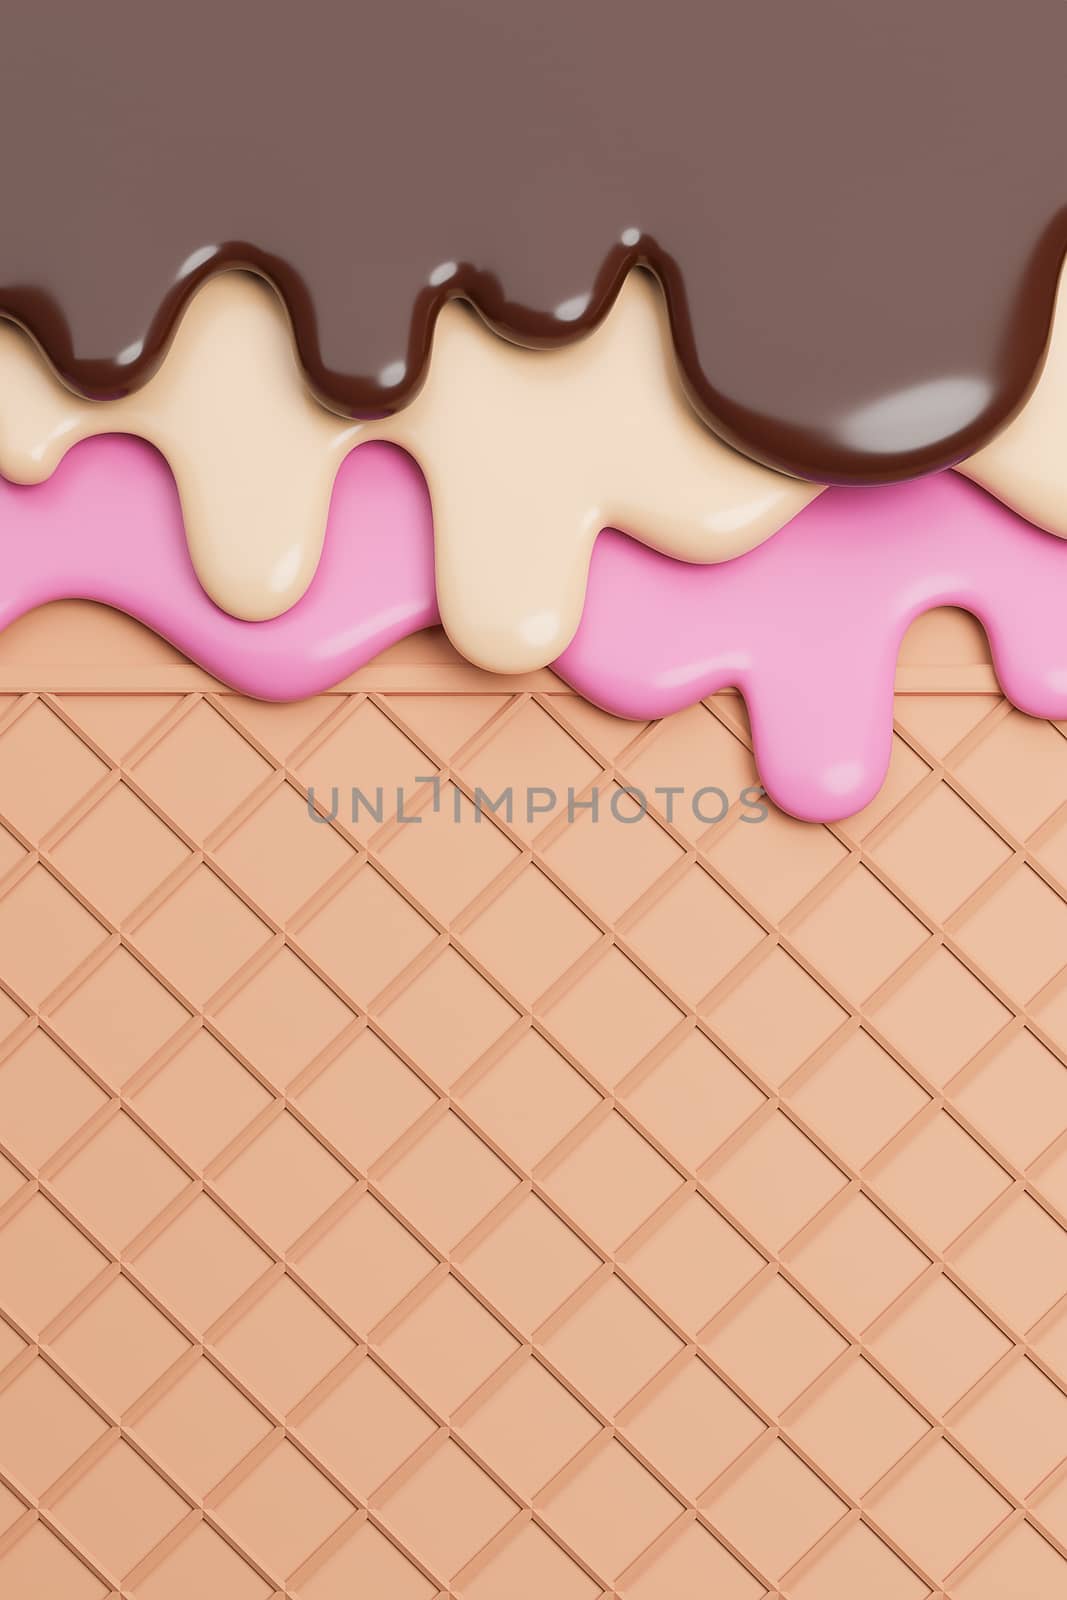 Chocolate and Vanilla and Strawbery Ice Cream Melted on Wafer Background.,3d model and illustration. by anotestocker